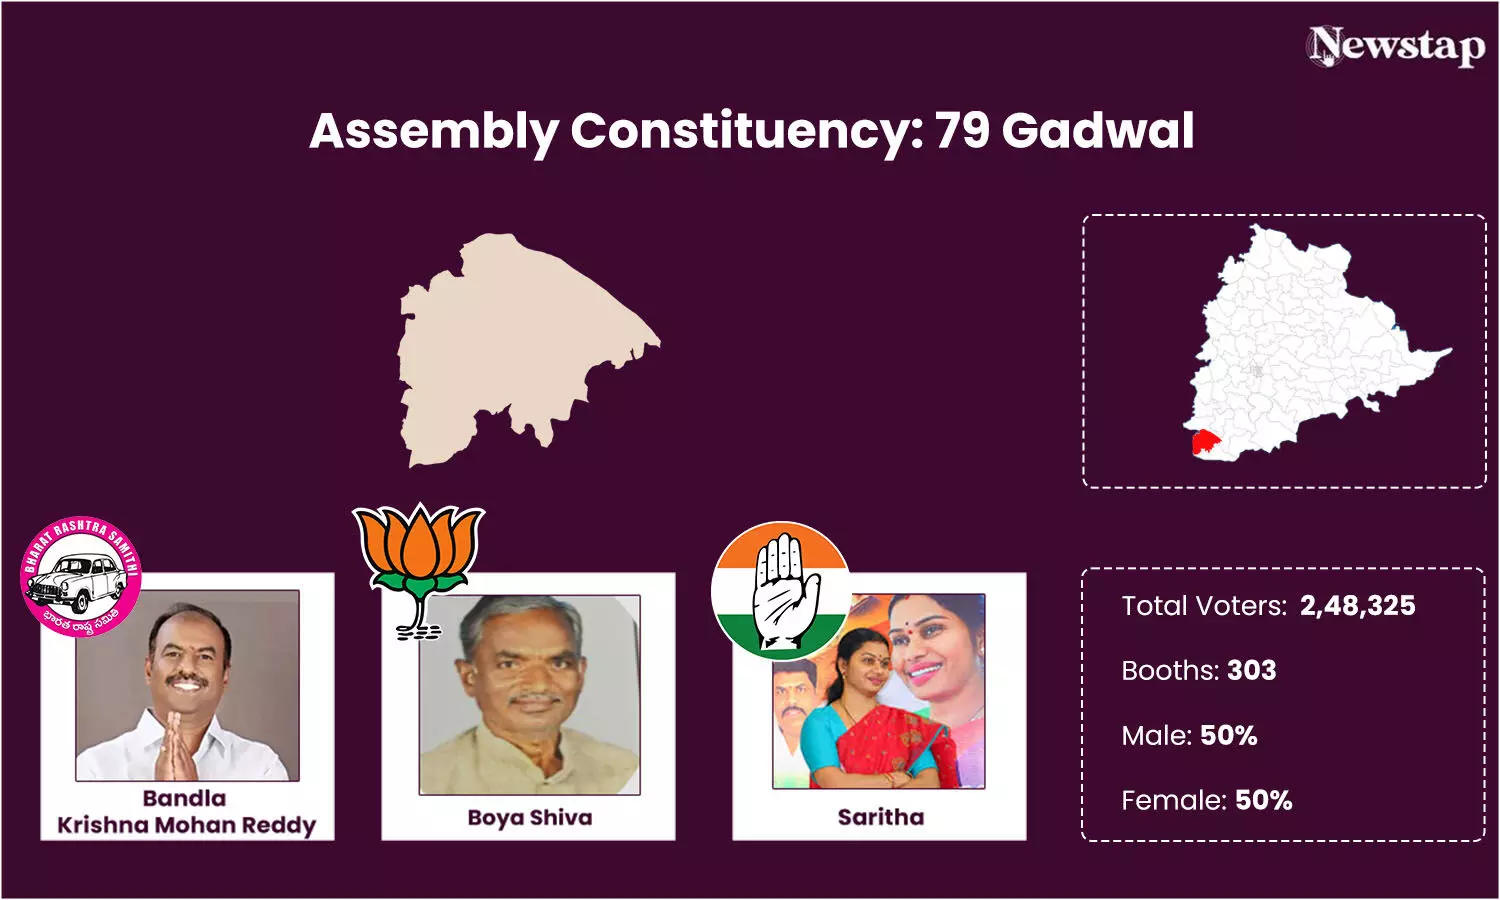 Will Bandla Krishna Mohan Reddy add to his family legacy by winning elections in Gadwal in 2023?